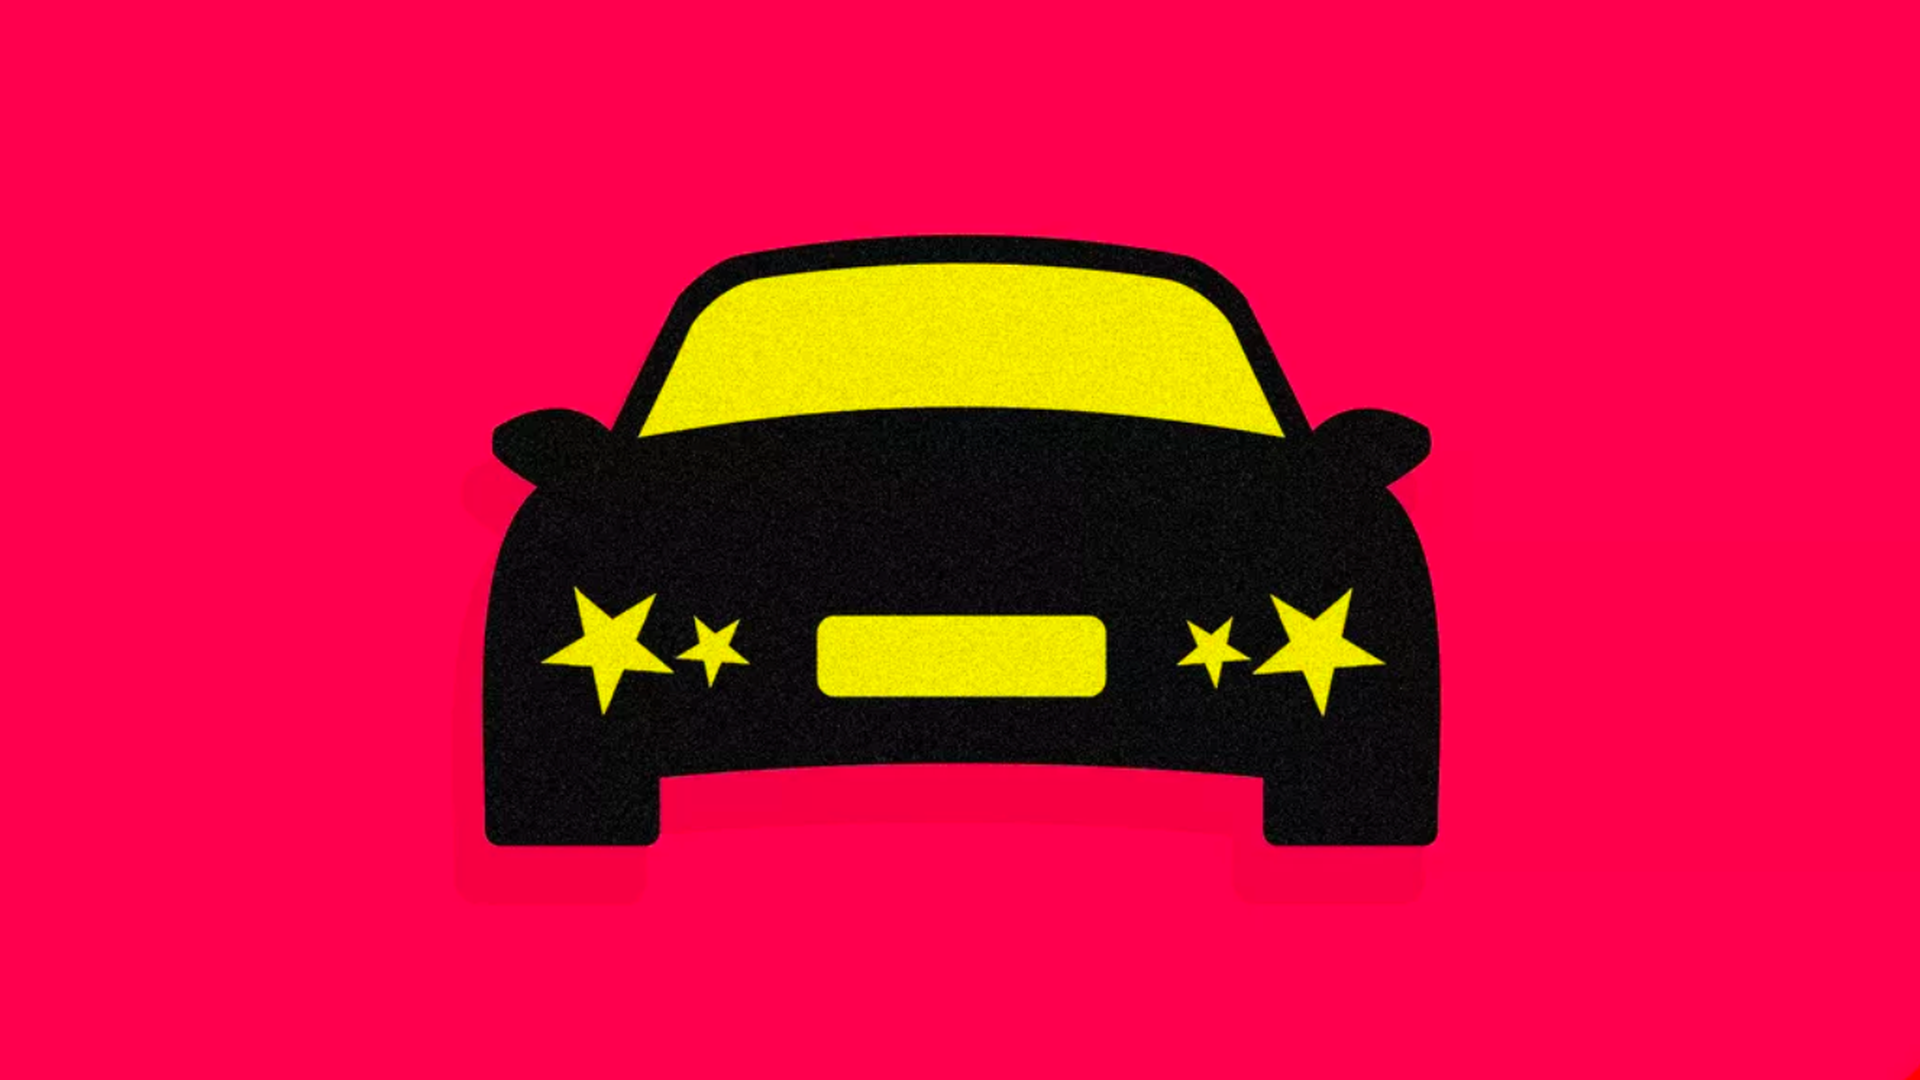 This illustration shows a car with headlines in the shape of stars.